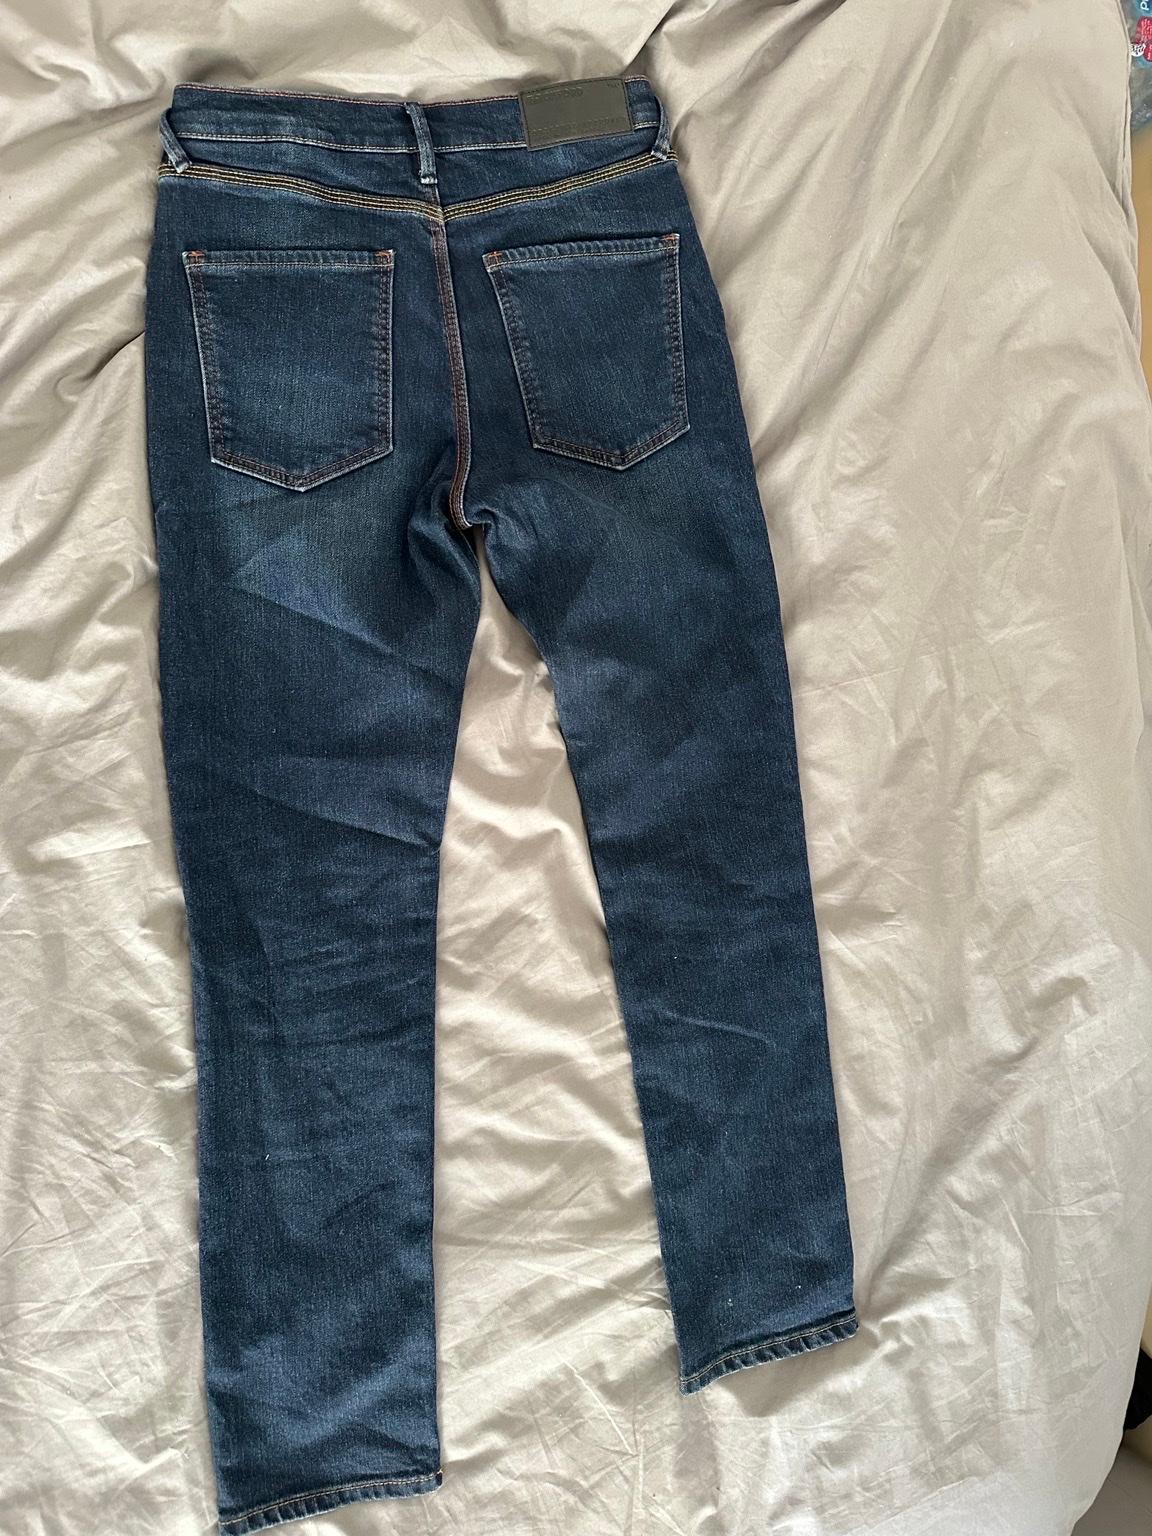 Motorcycle Armourlite jeans with padding in SE1 London for £39.99 for ...